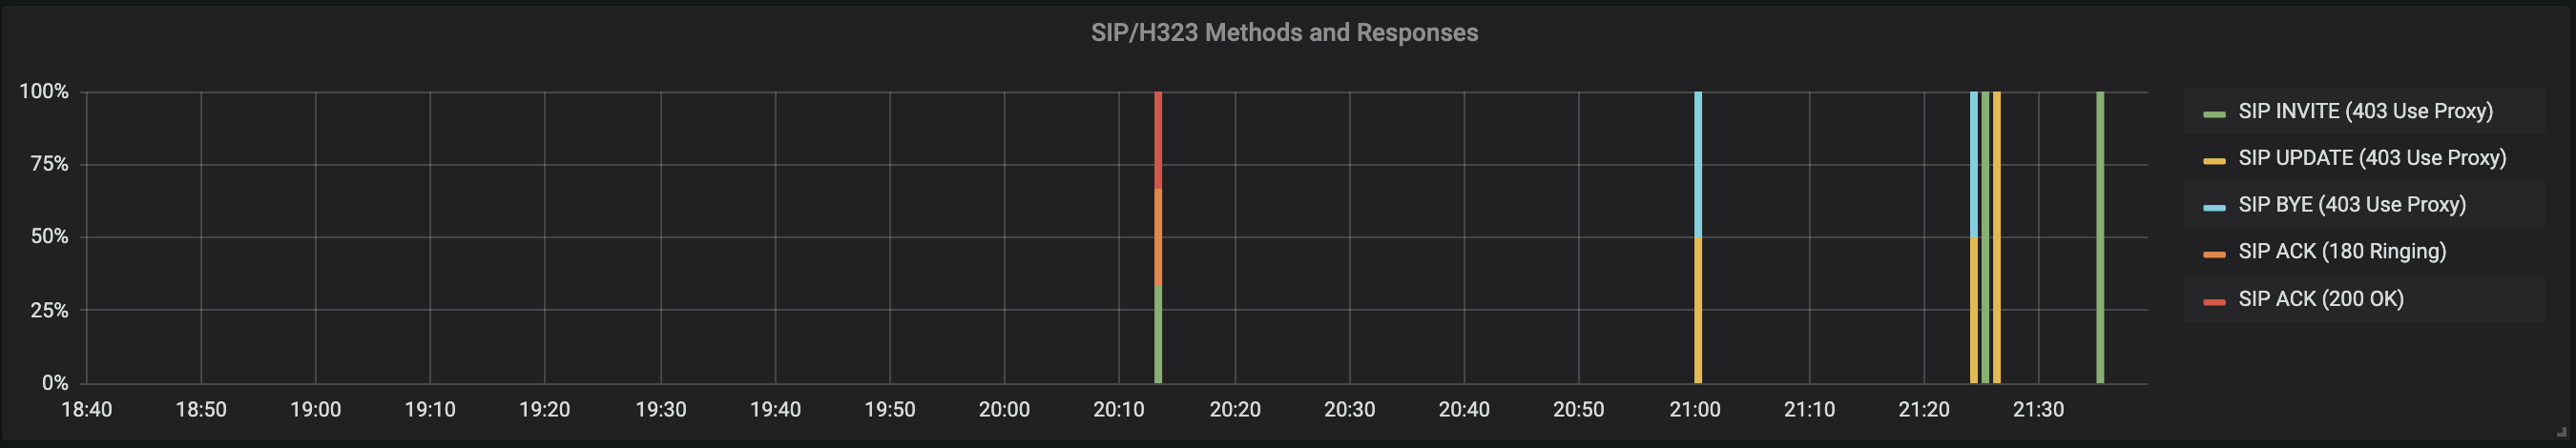 Figure 4: Graphical representation of the percentage of SIP request methods and associated responses.